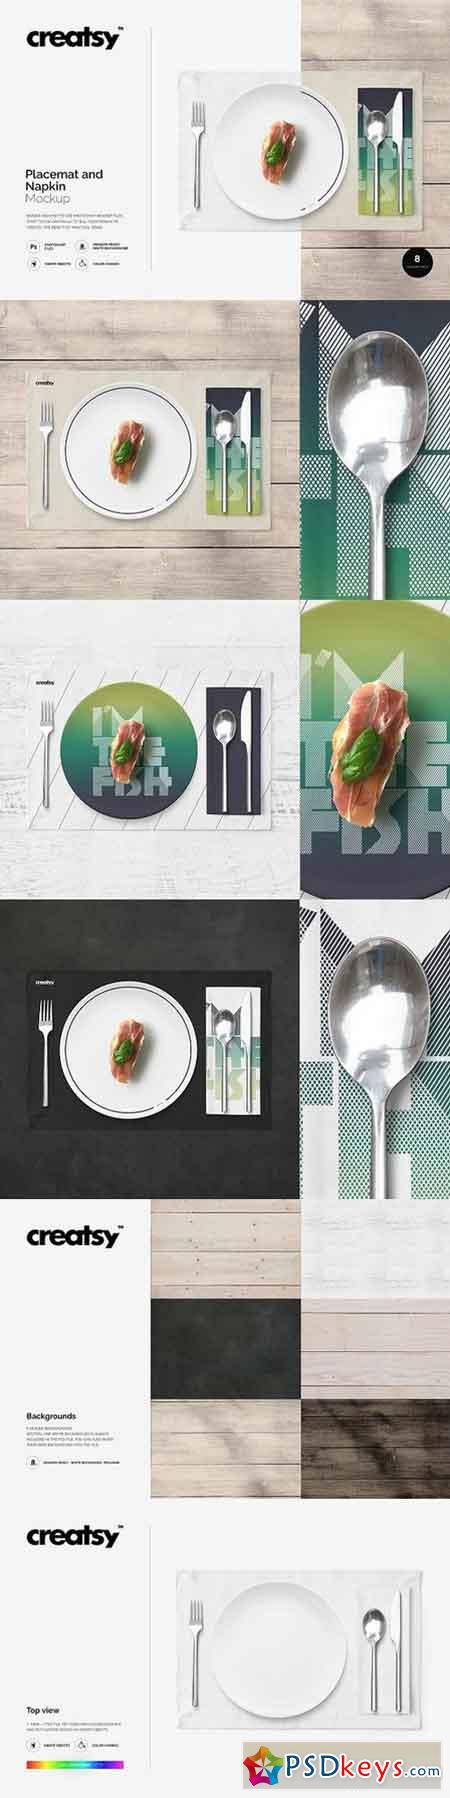 Download Placemat and Napkin Mockup 1142076 » Free Download Photoshop Vector Stock image Via Torrent ...